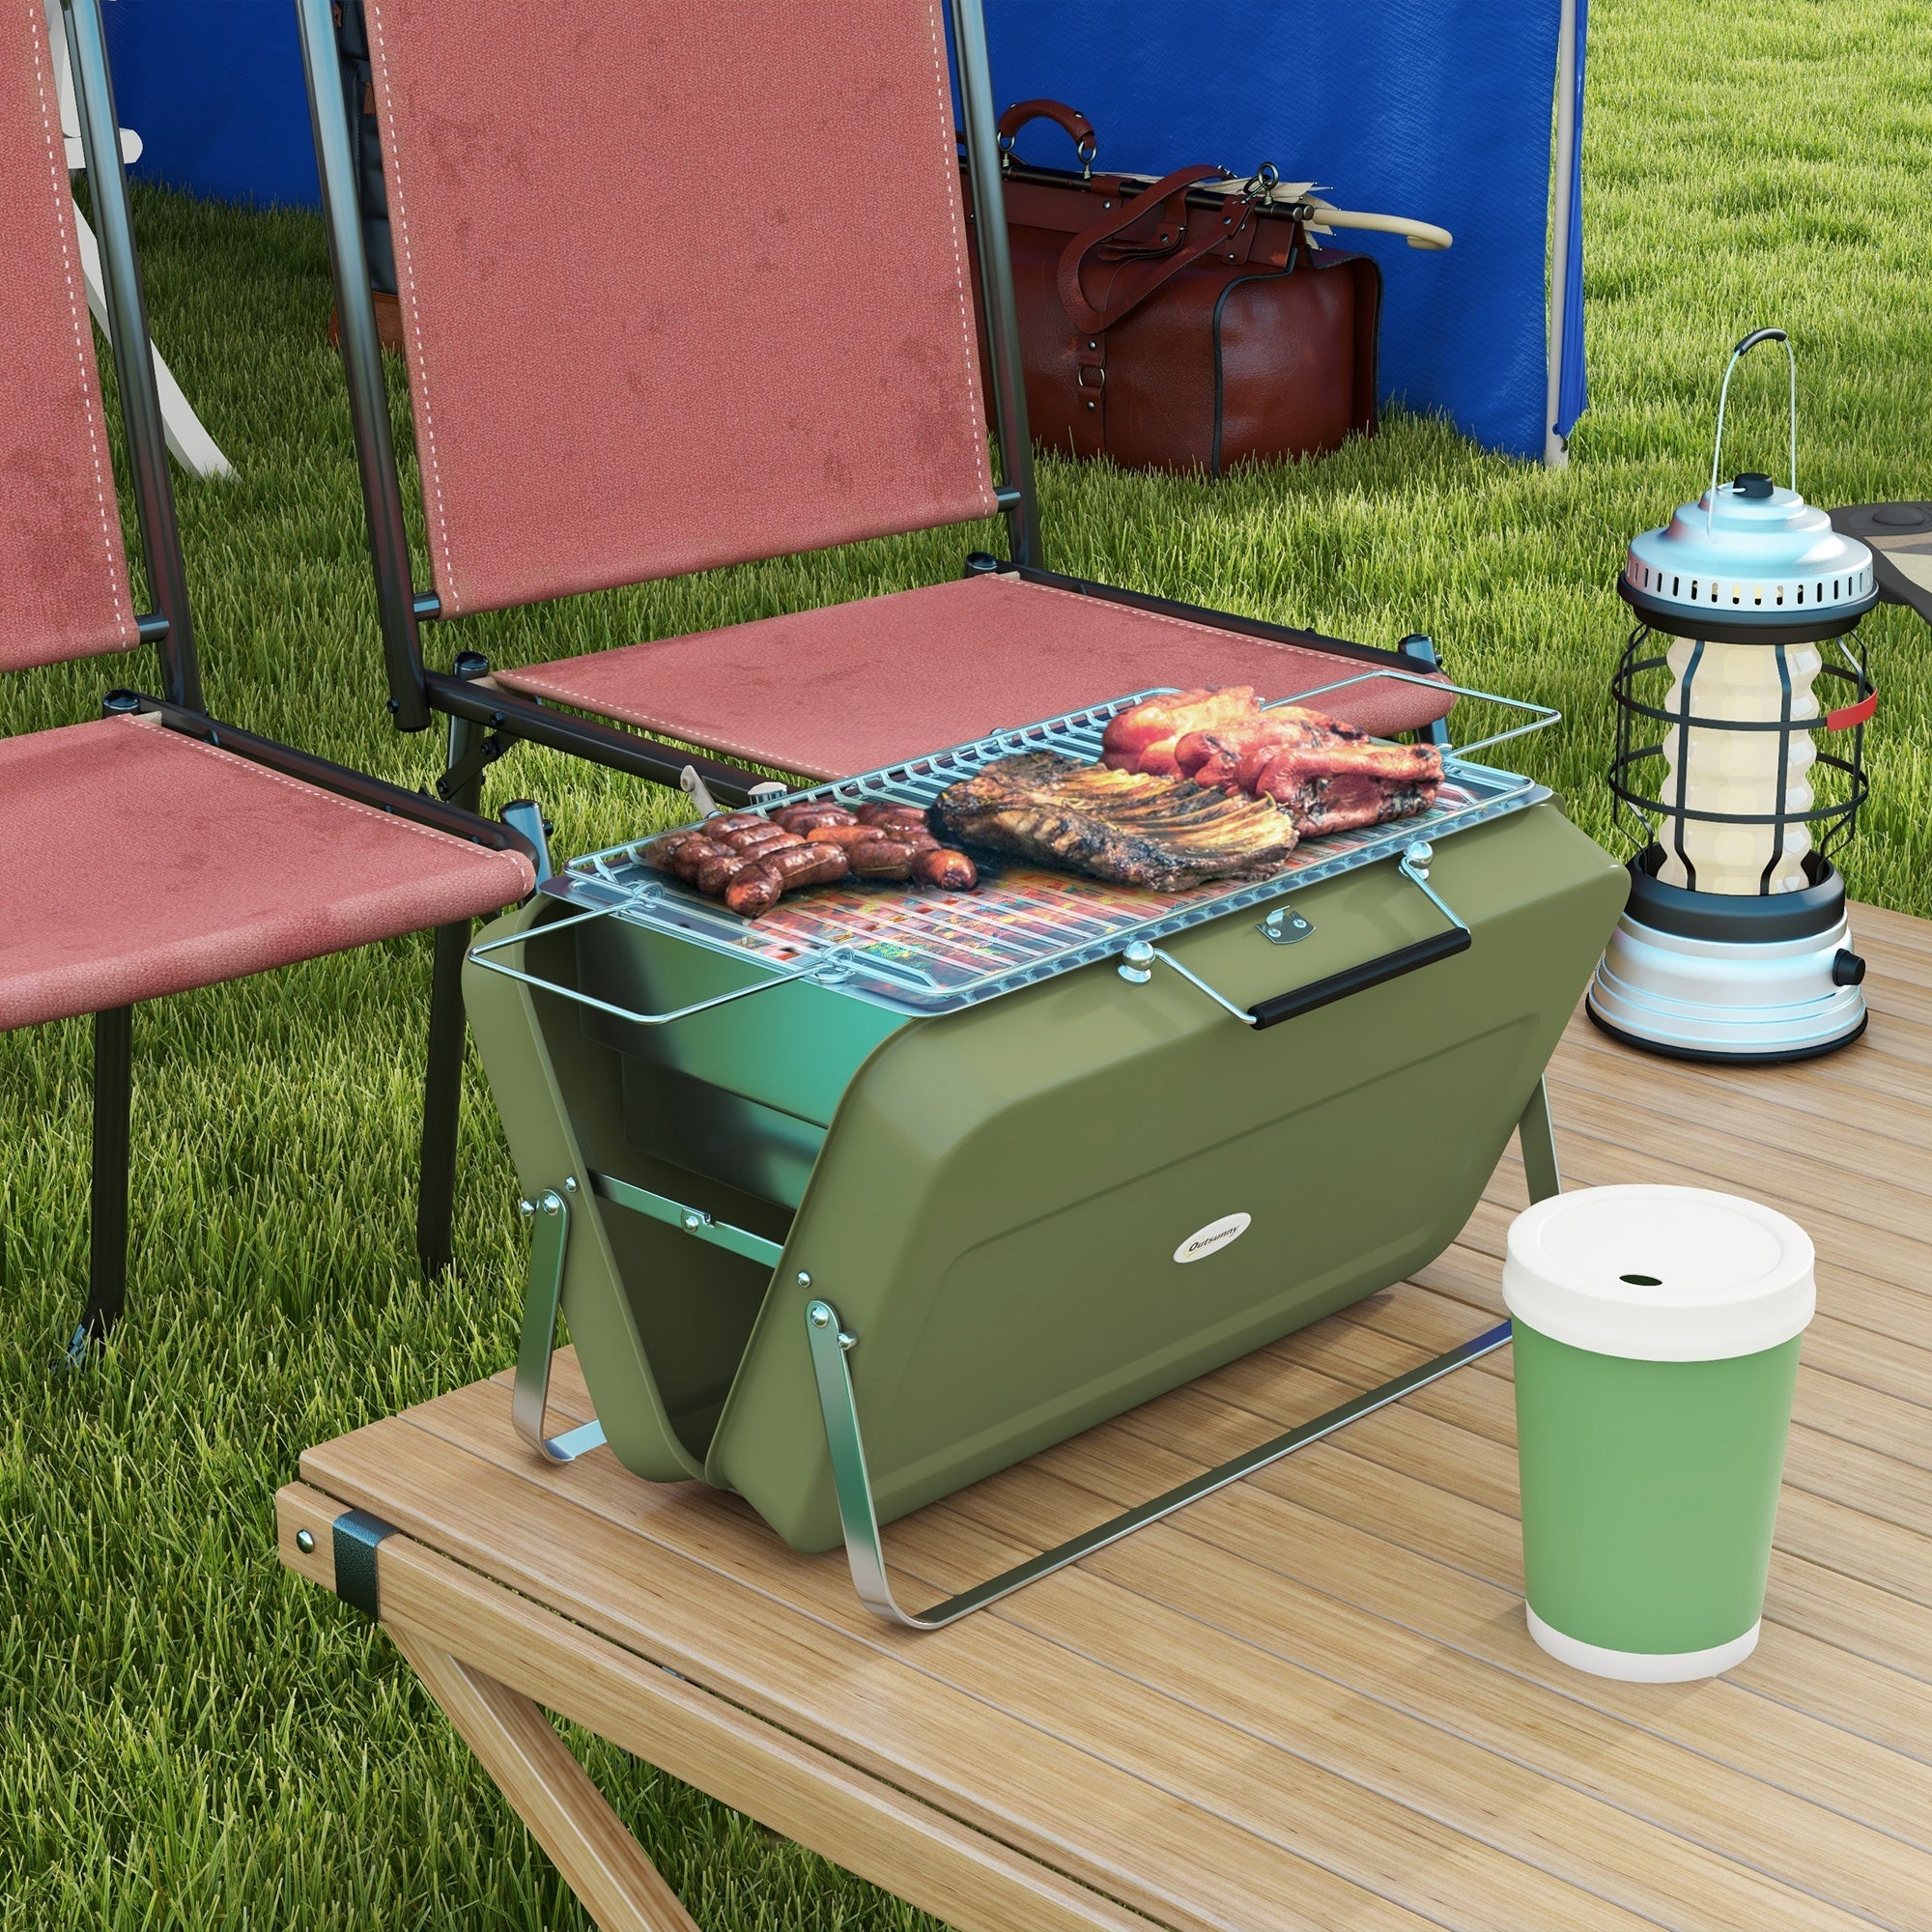 Foldable Suitcase Design Mini Charcoal Barbecue Grill BBQ, Green-1